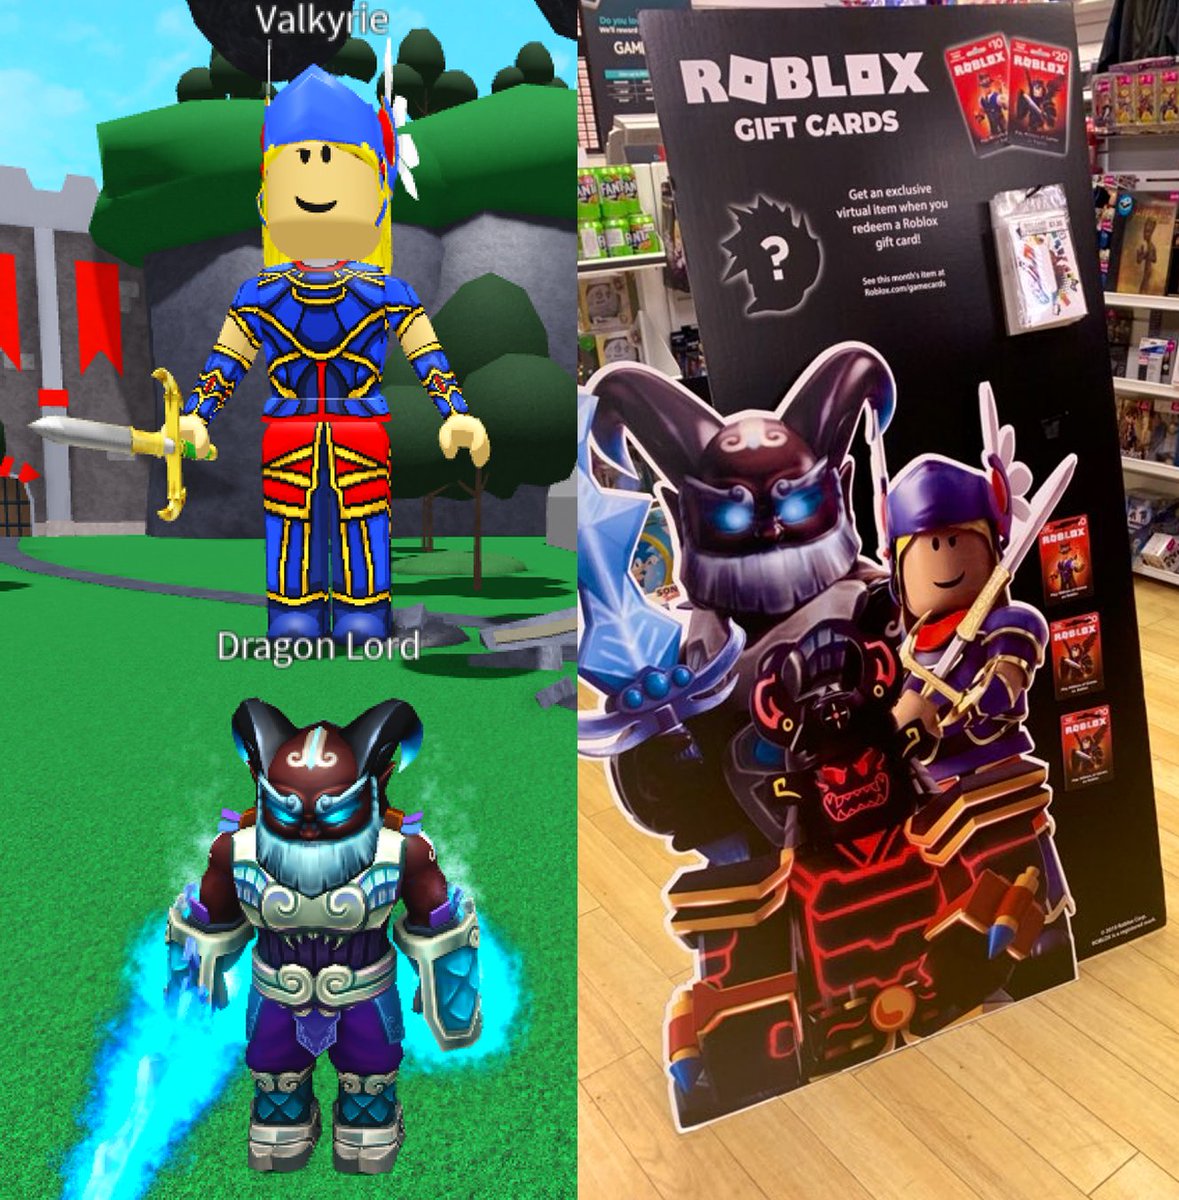 Coolbulls On Twitter Shoutout To Roblox For Including Two